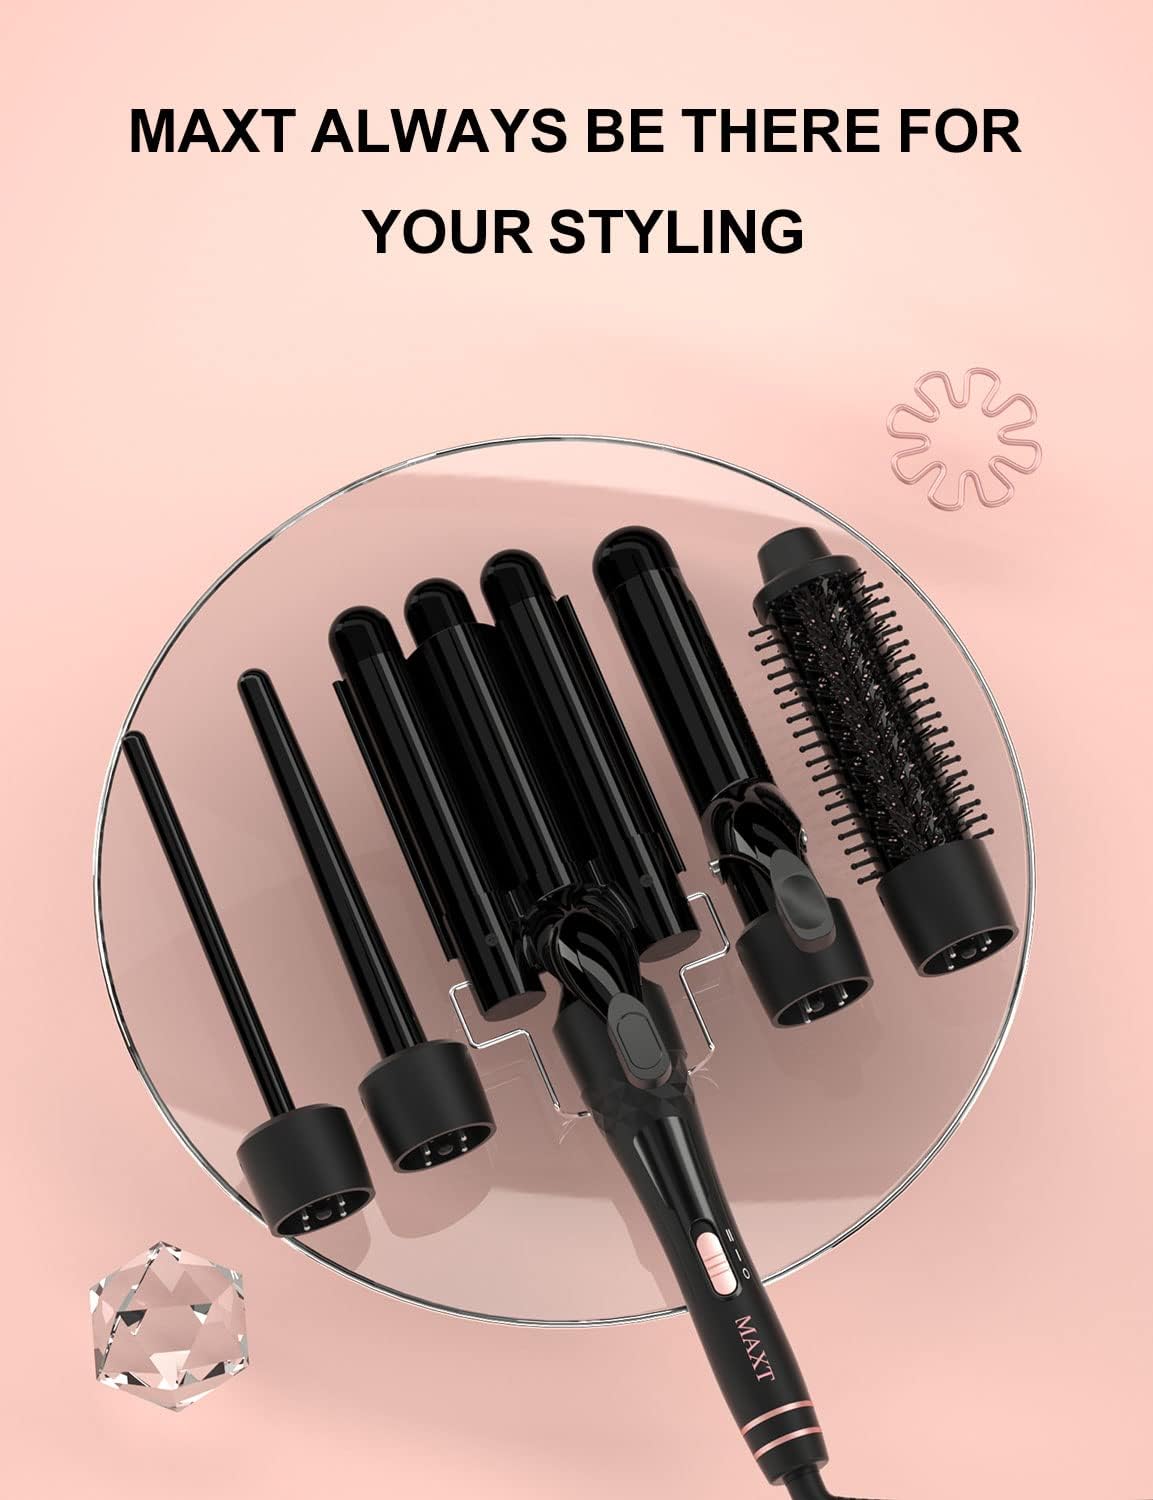 5 in 1 Hair Waver Curling Set for Long and Short Hair - 30s Heat-up Ceramic Iron with 2 Temps and 5 Barrels (0.3"-1.25")